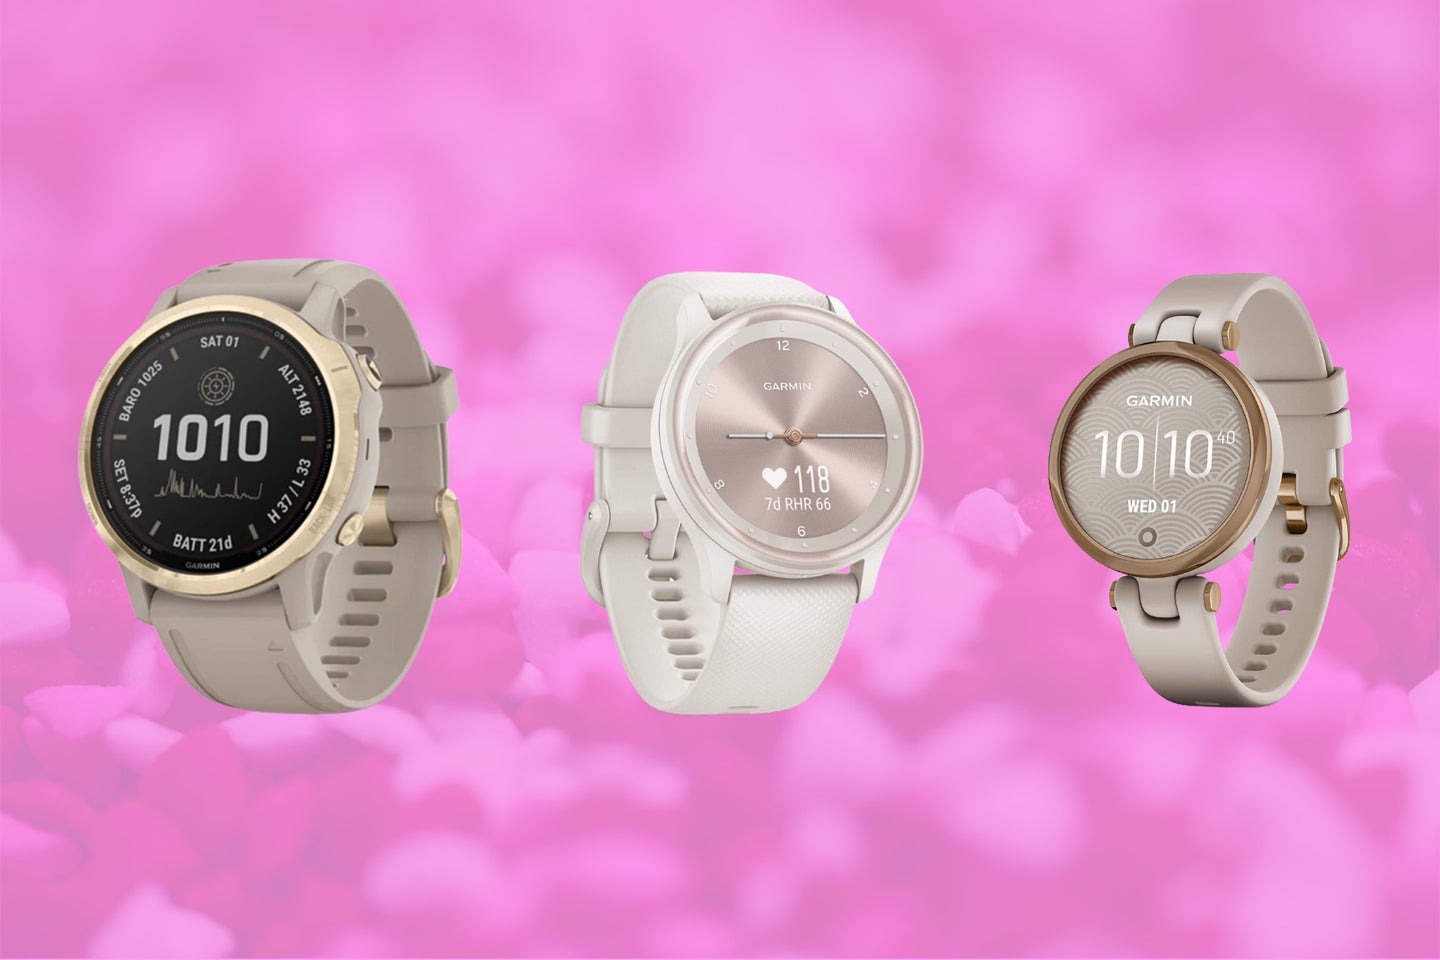 A lineup of garmin watches on a pink heart background